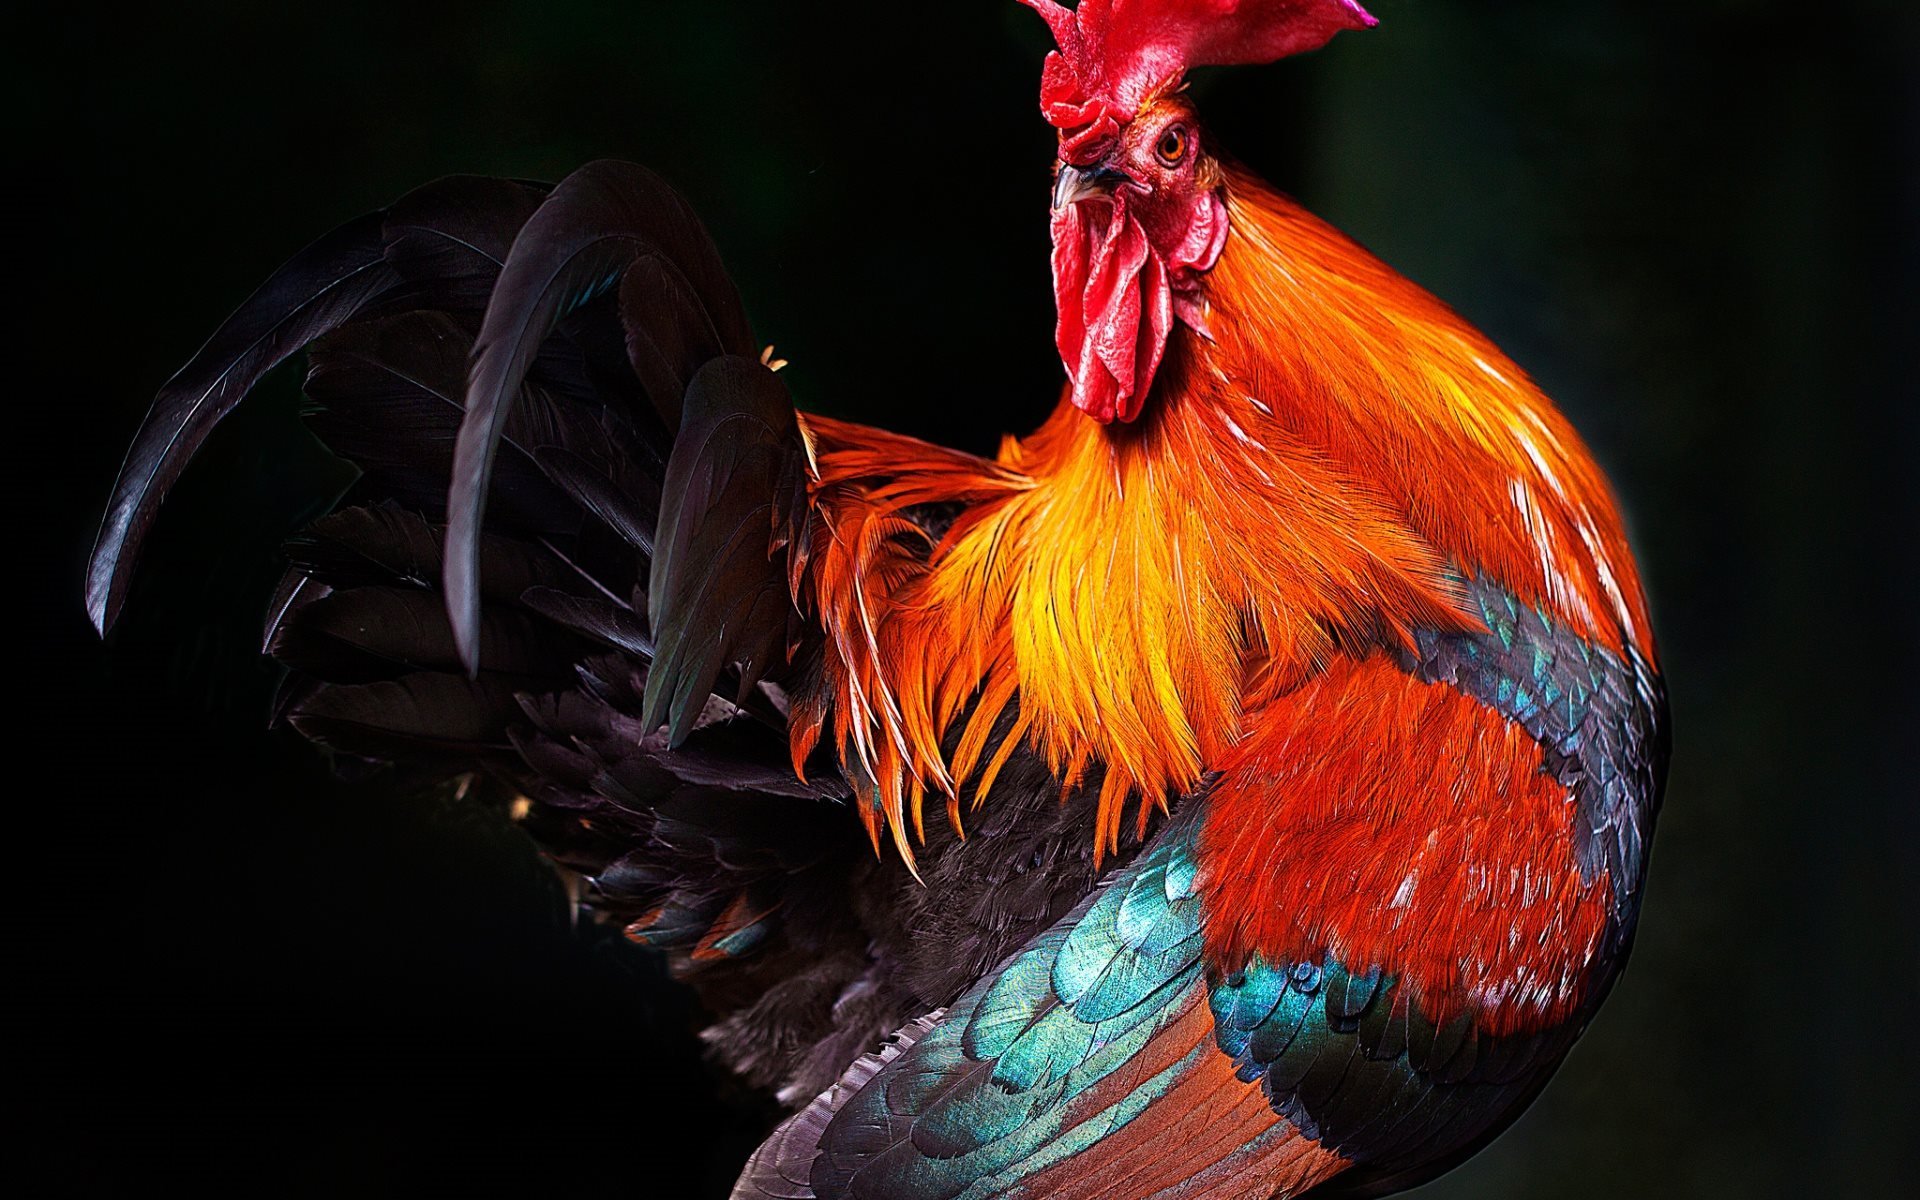 The Magnificent Photographs of Roosters During Fighting Looking so good   Rooster Fighting rooster Game fowl